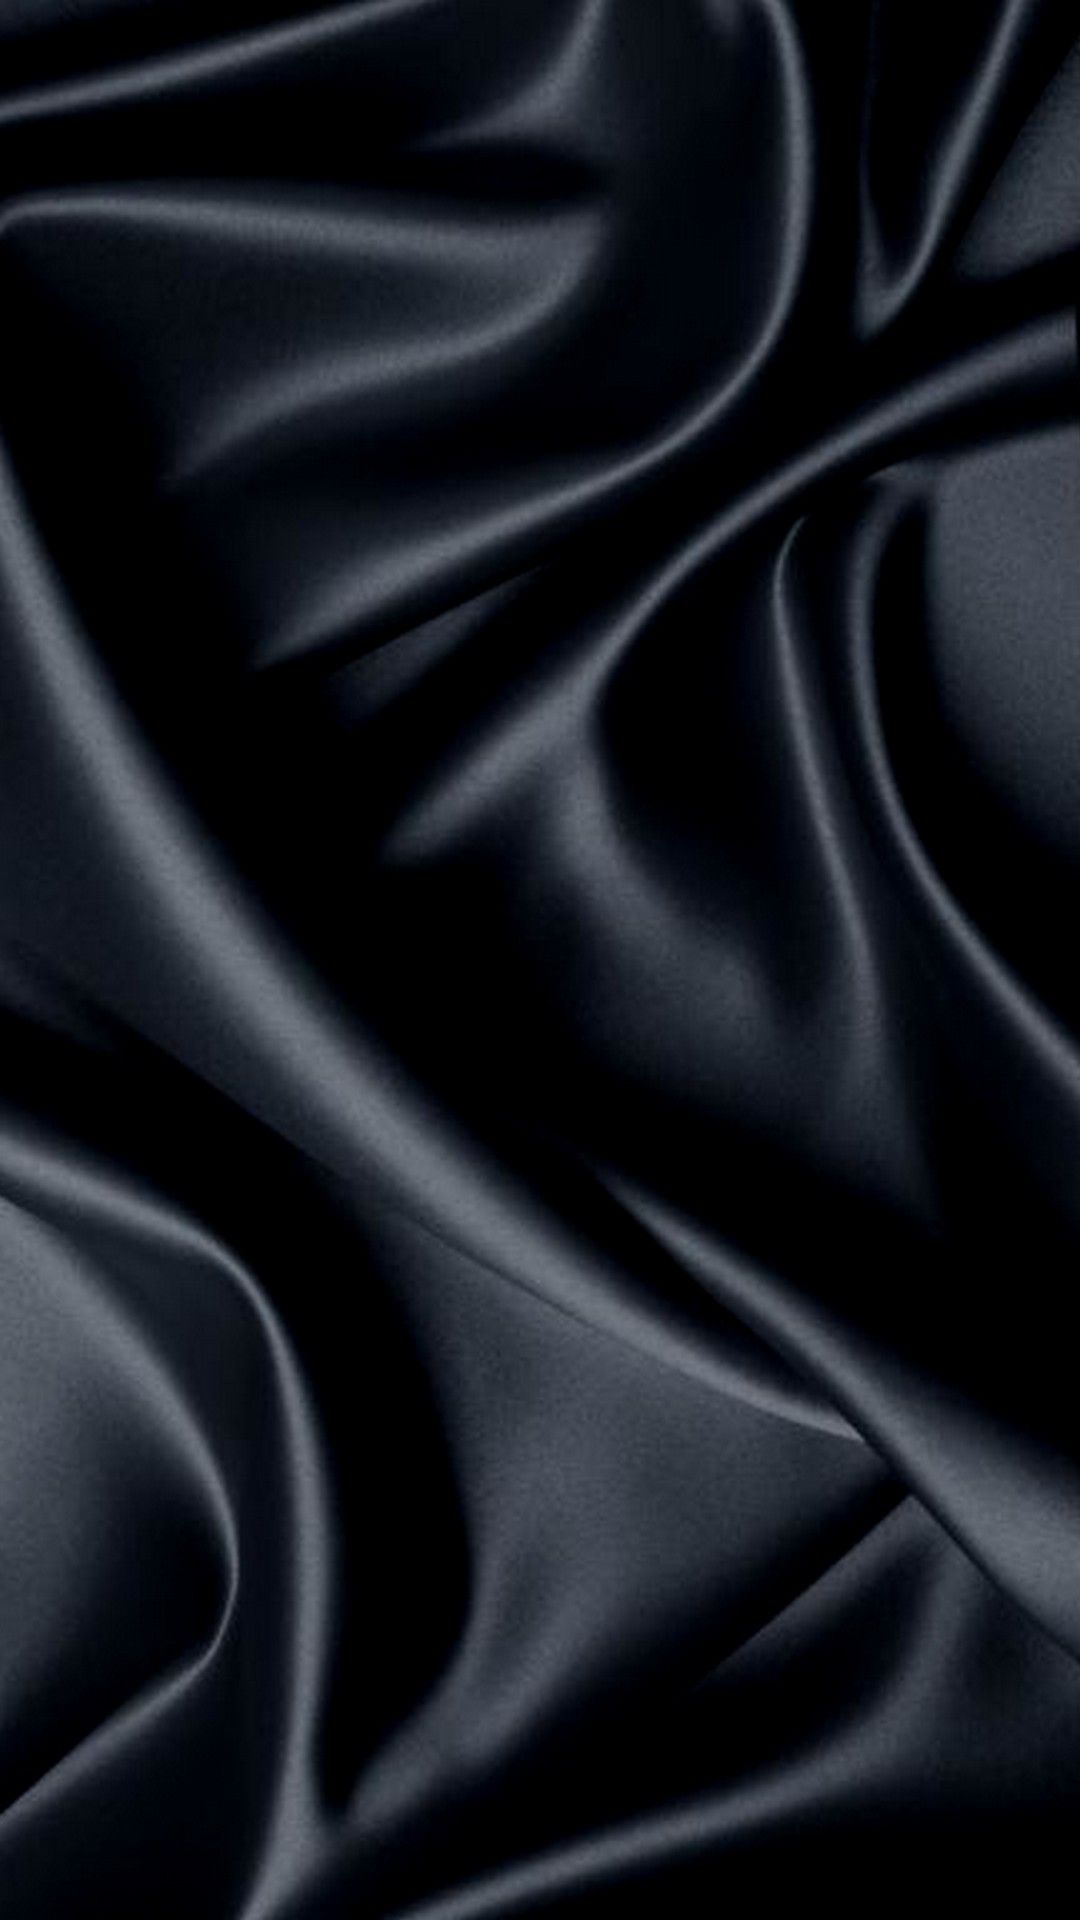 Black Silk iPhone Wallpaper with high-resolution 1080x1920 pixel. You can use this wallpaper for your iPhone 5, 6, 7, 8, X, XS, XR backgrounds, Mobile Screensaver, or iPad Lock Screen - Silk